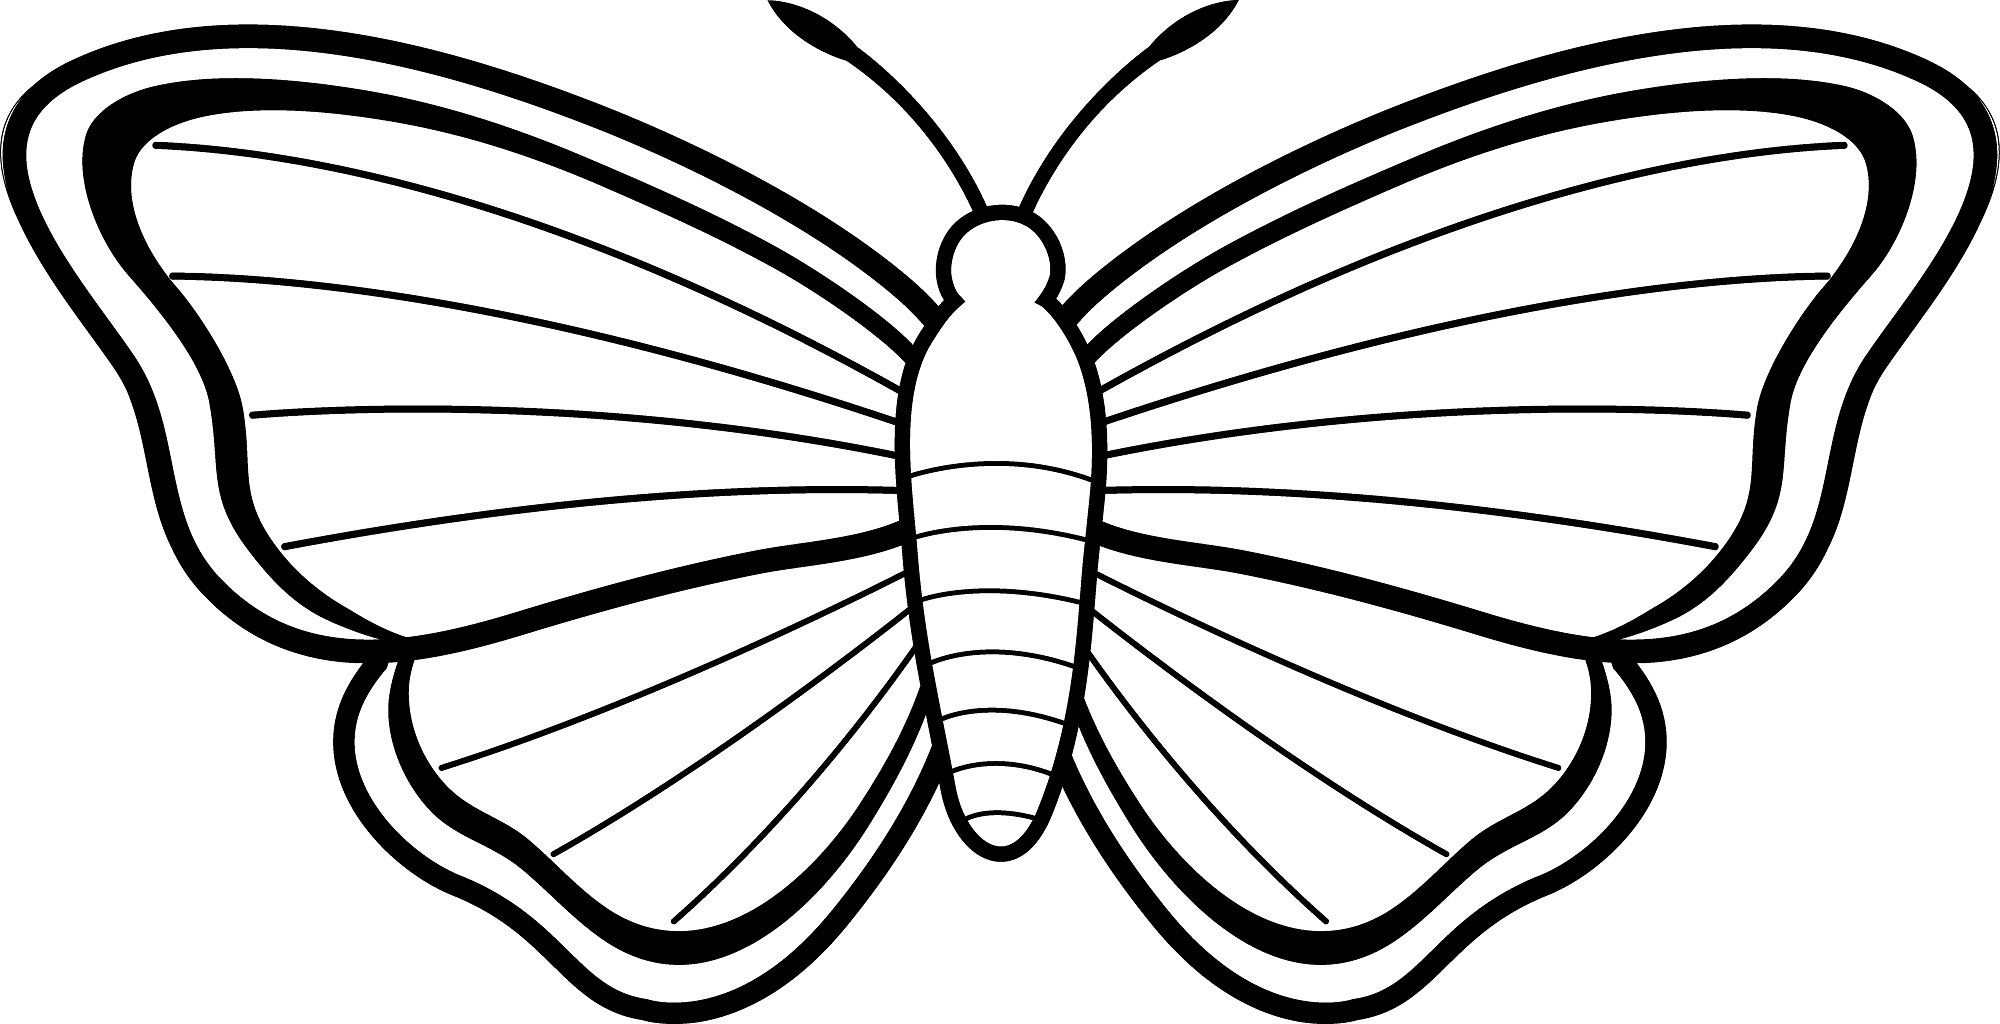 Line Drawing Butterflies at GetDrawings.com | Free for personal use ...